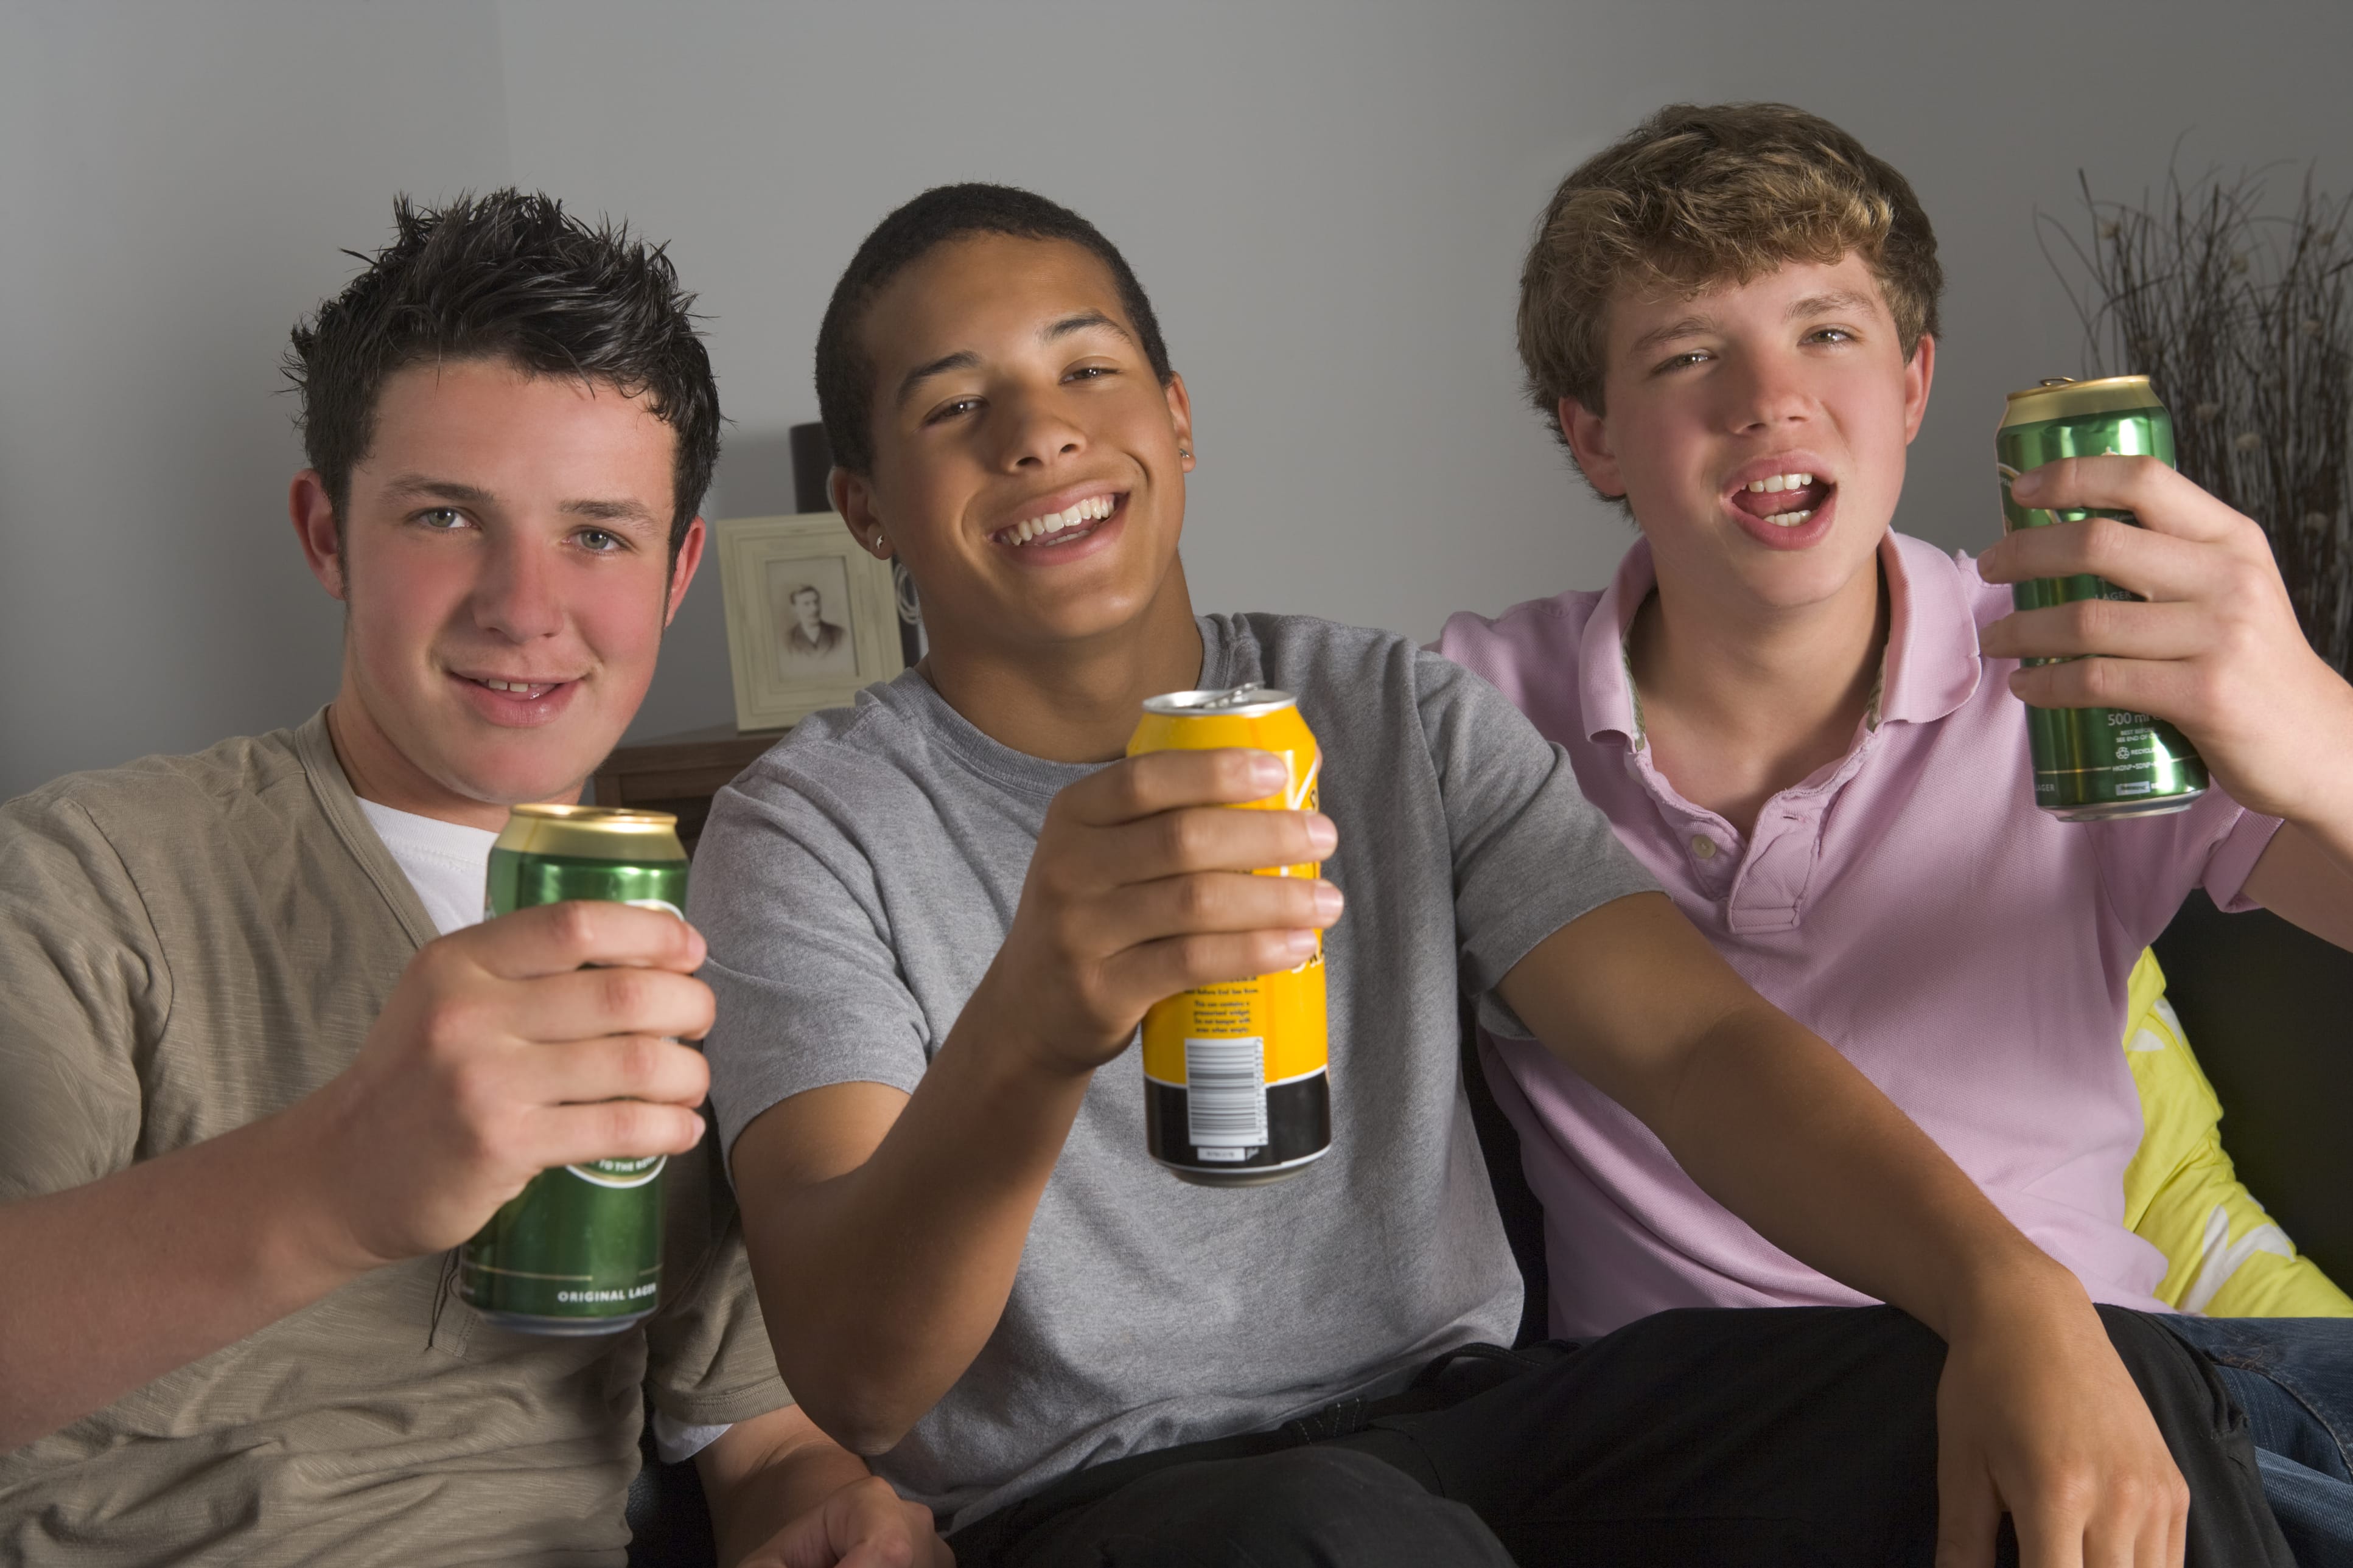 Pictures with teens with alcohol